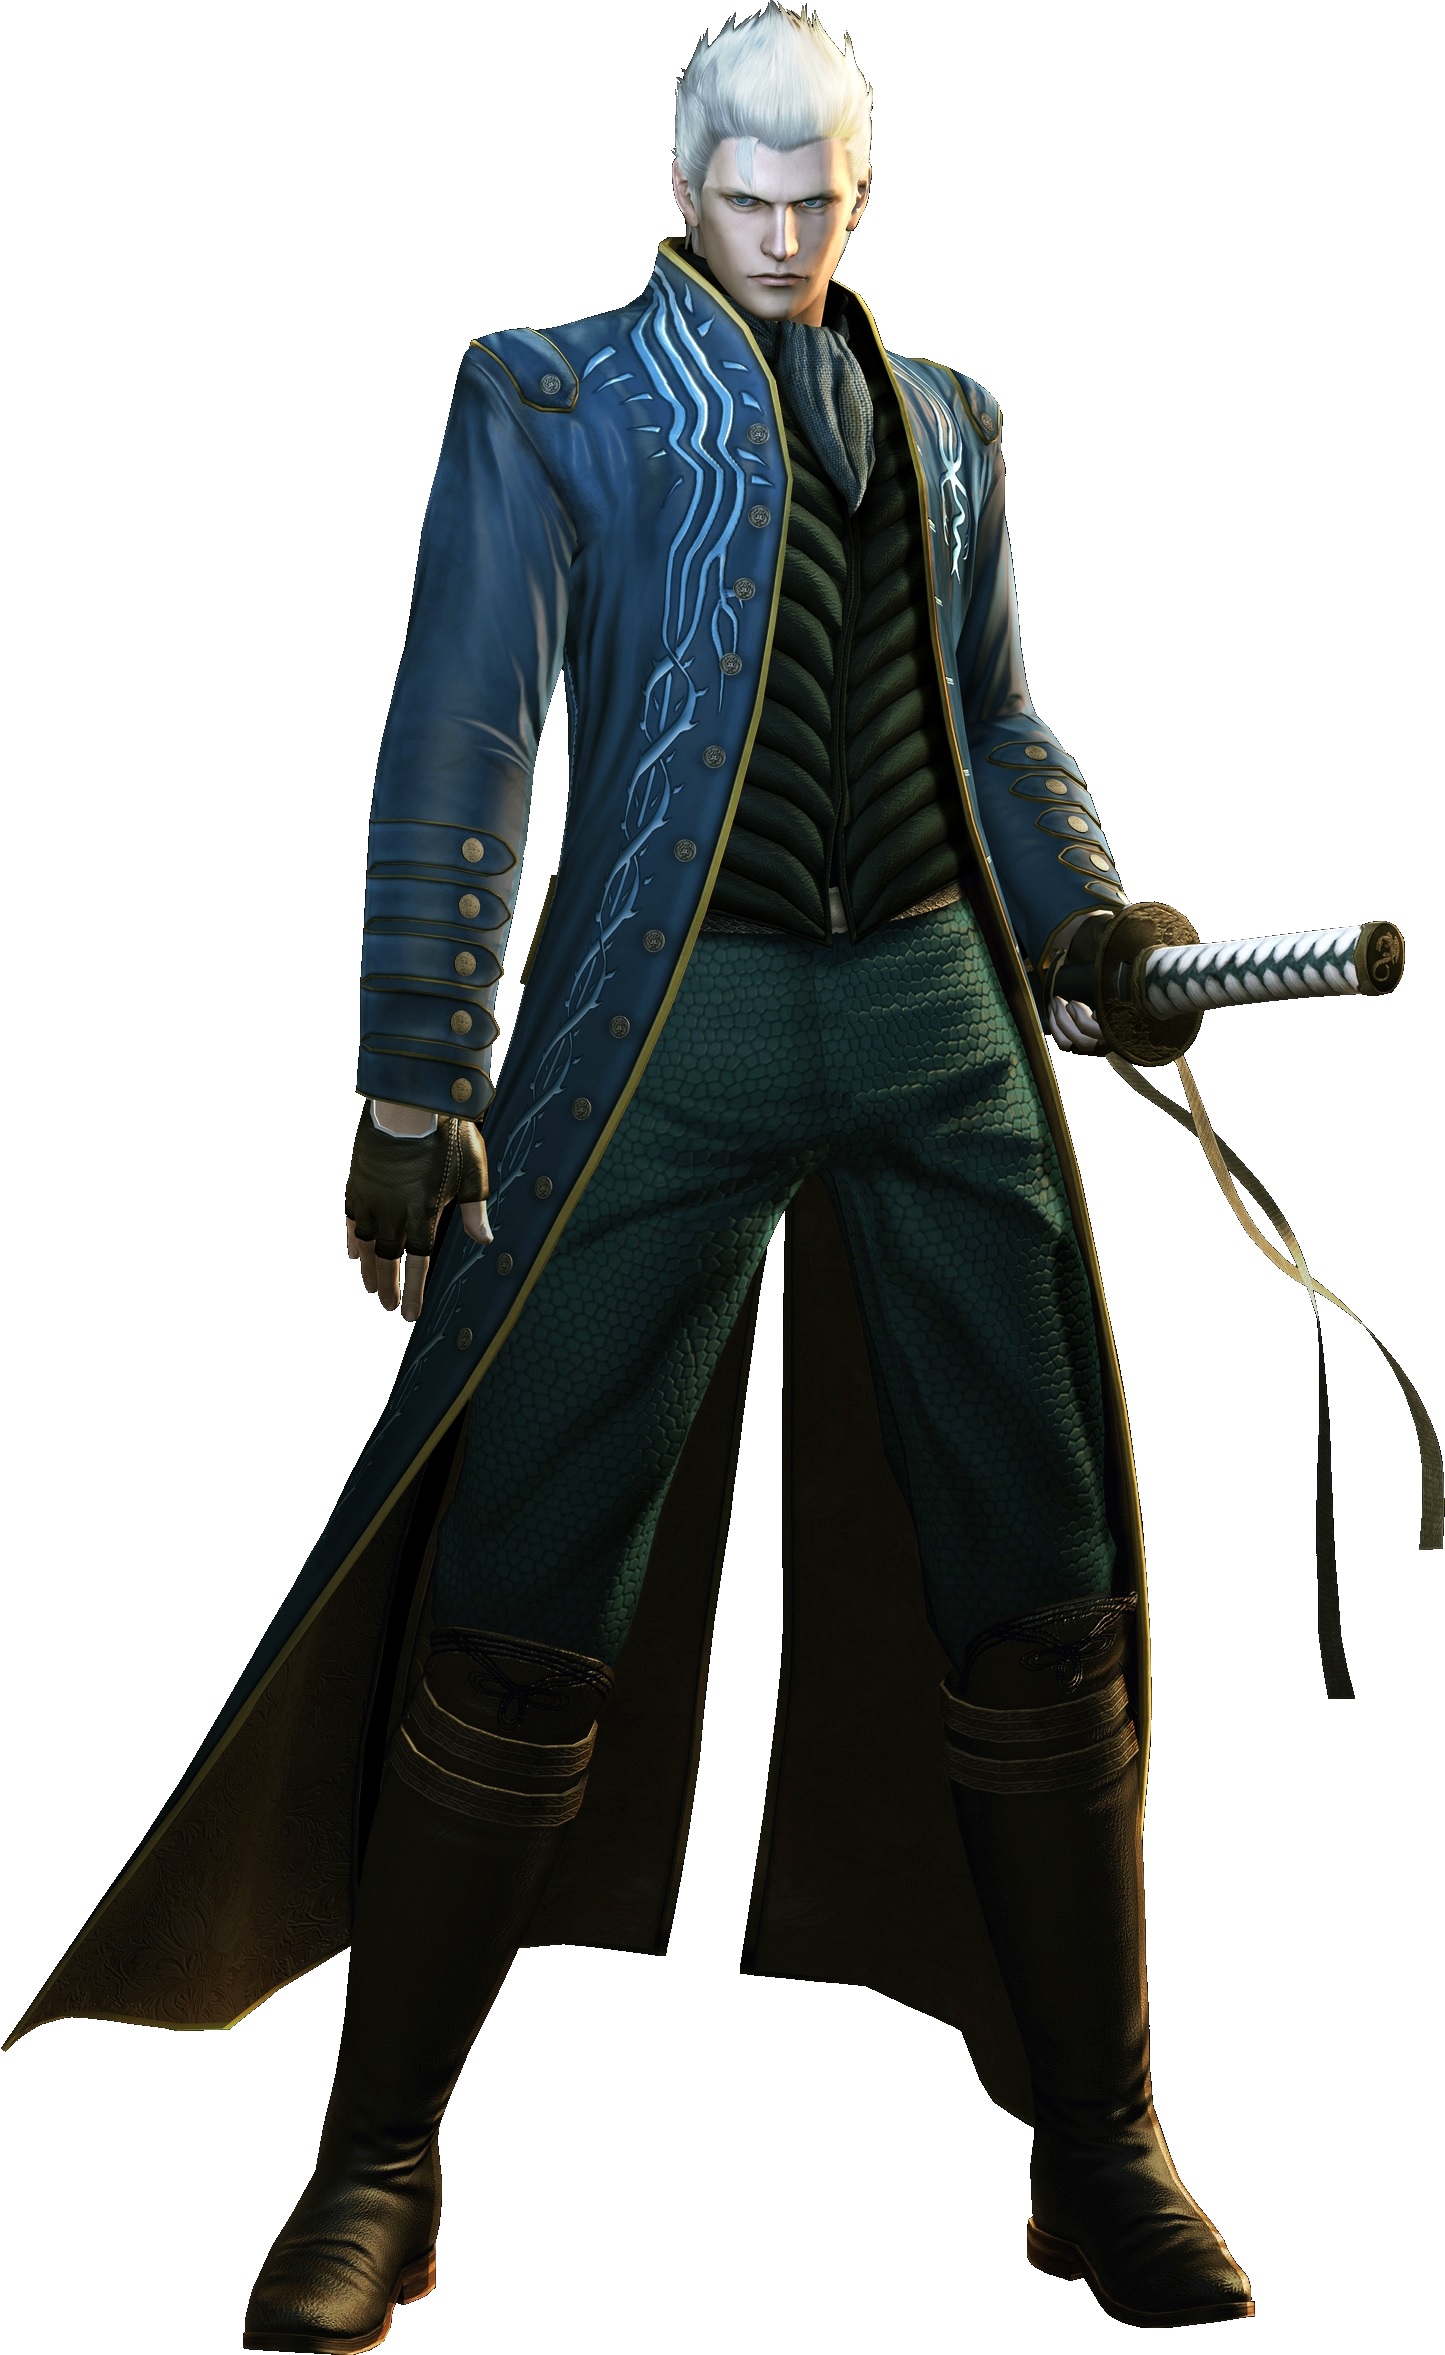 Teaser Hints At Vergil In Devil May Cry 4 Special Edition - Game